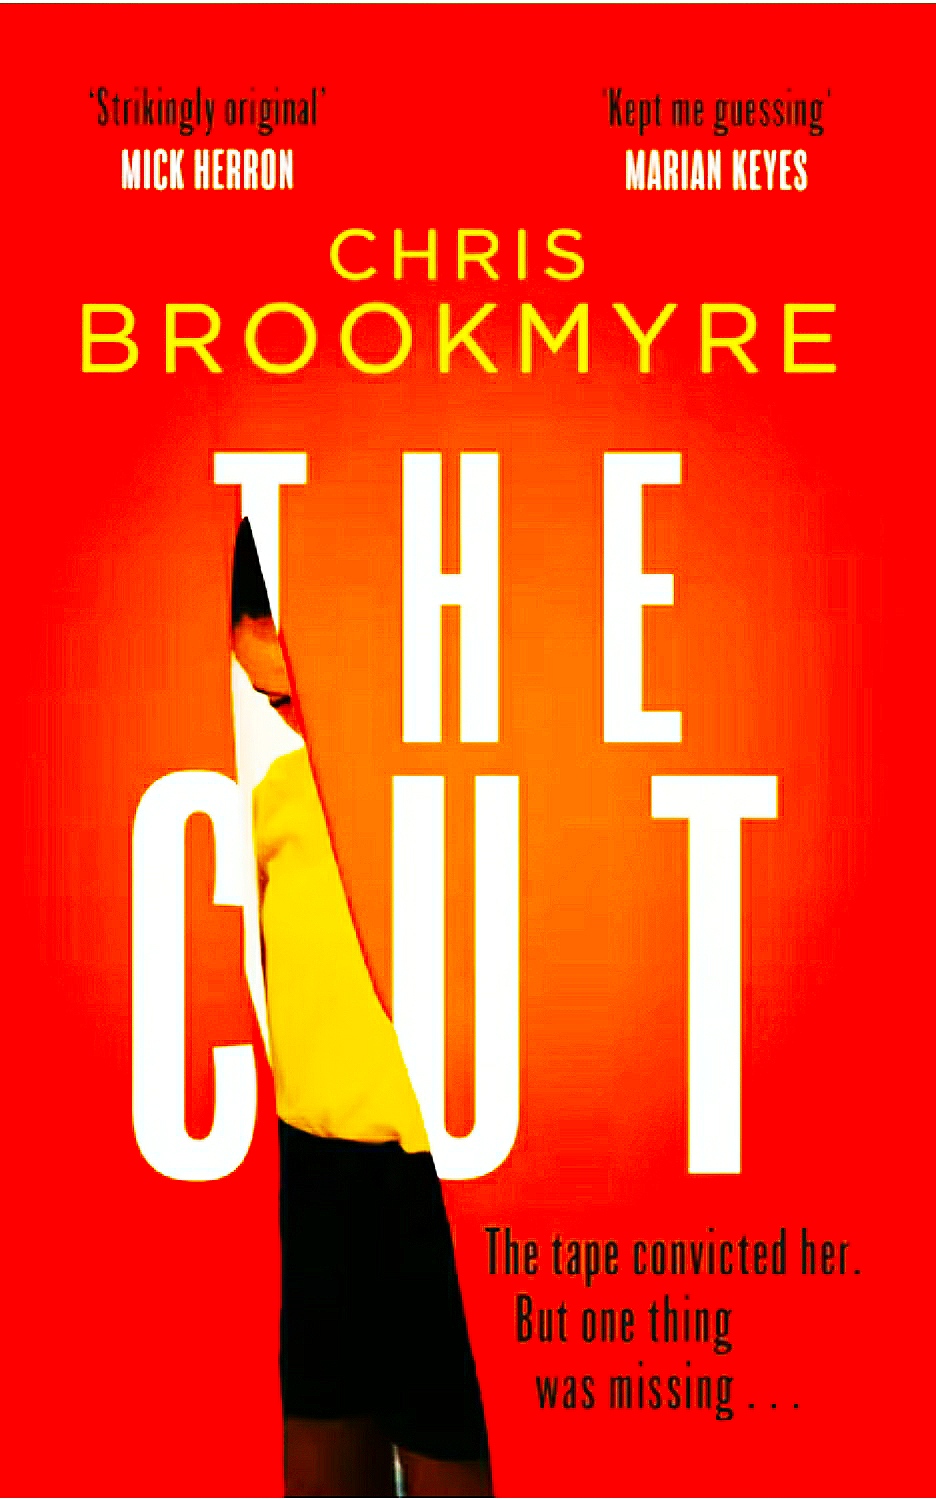 Books – Review of The Cut by Christopher Brookmyre -2021 – Interesting Story